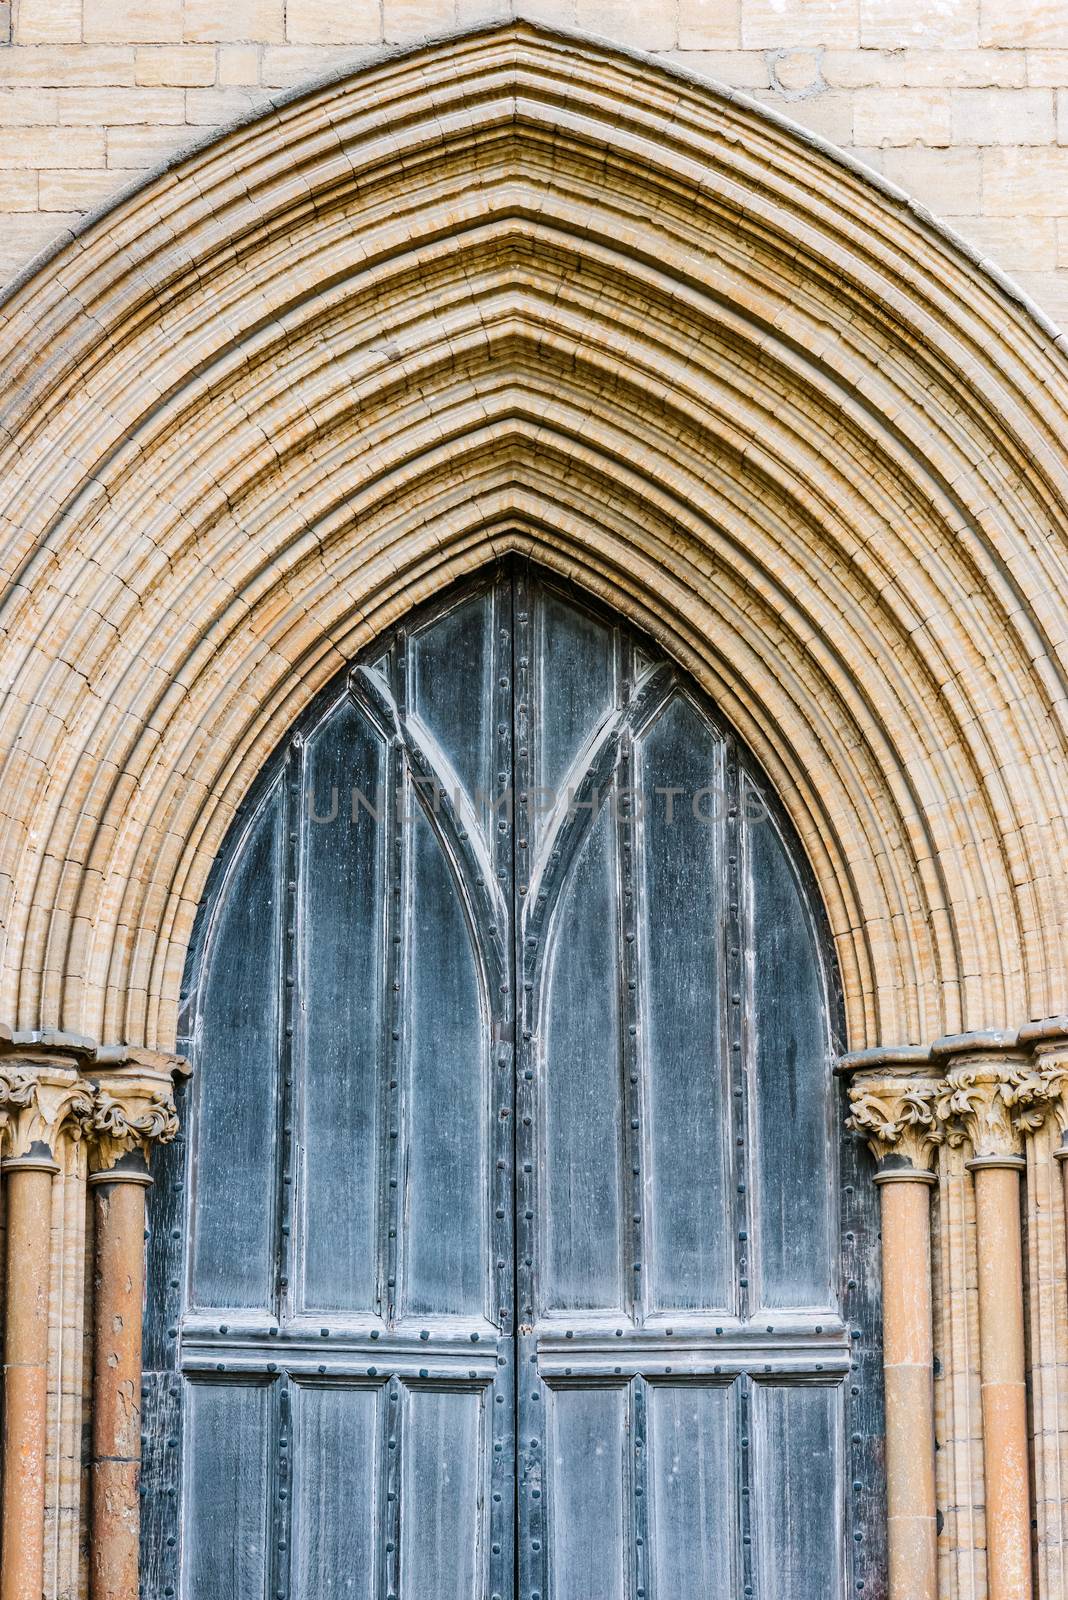 Peterborough Cathedral front wooden gate detail entrance outdoors by Altinosmanaj